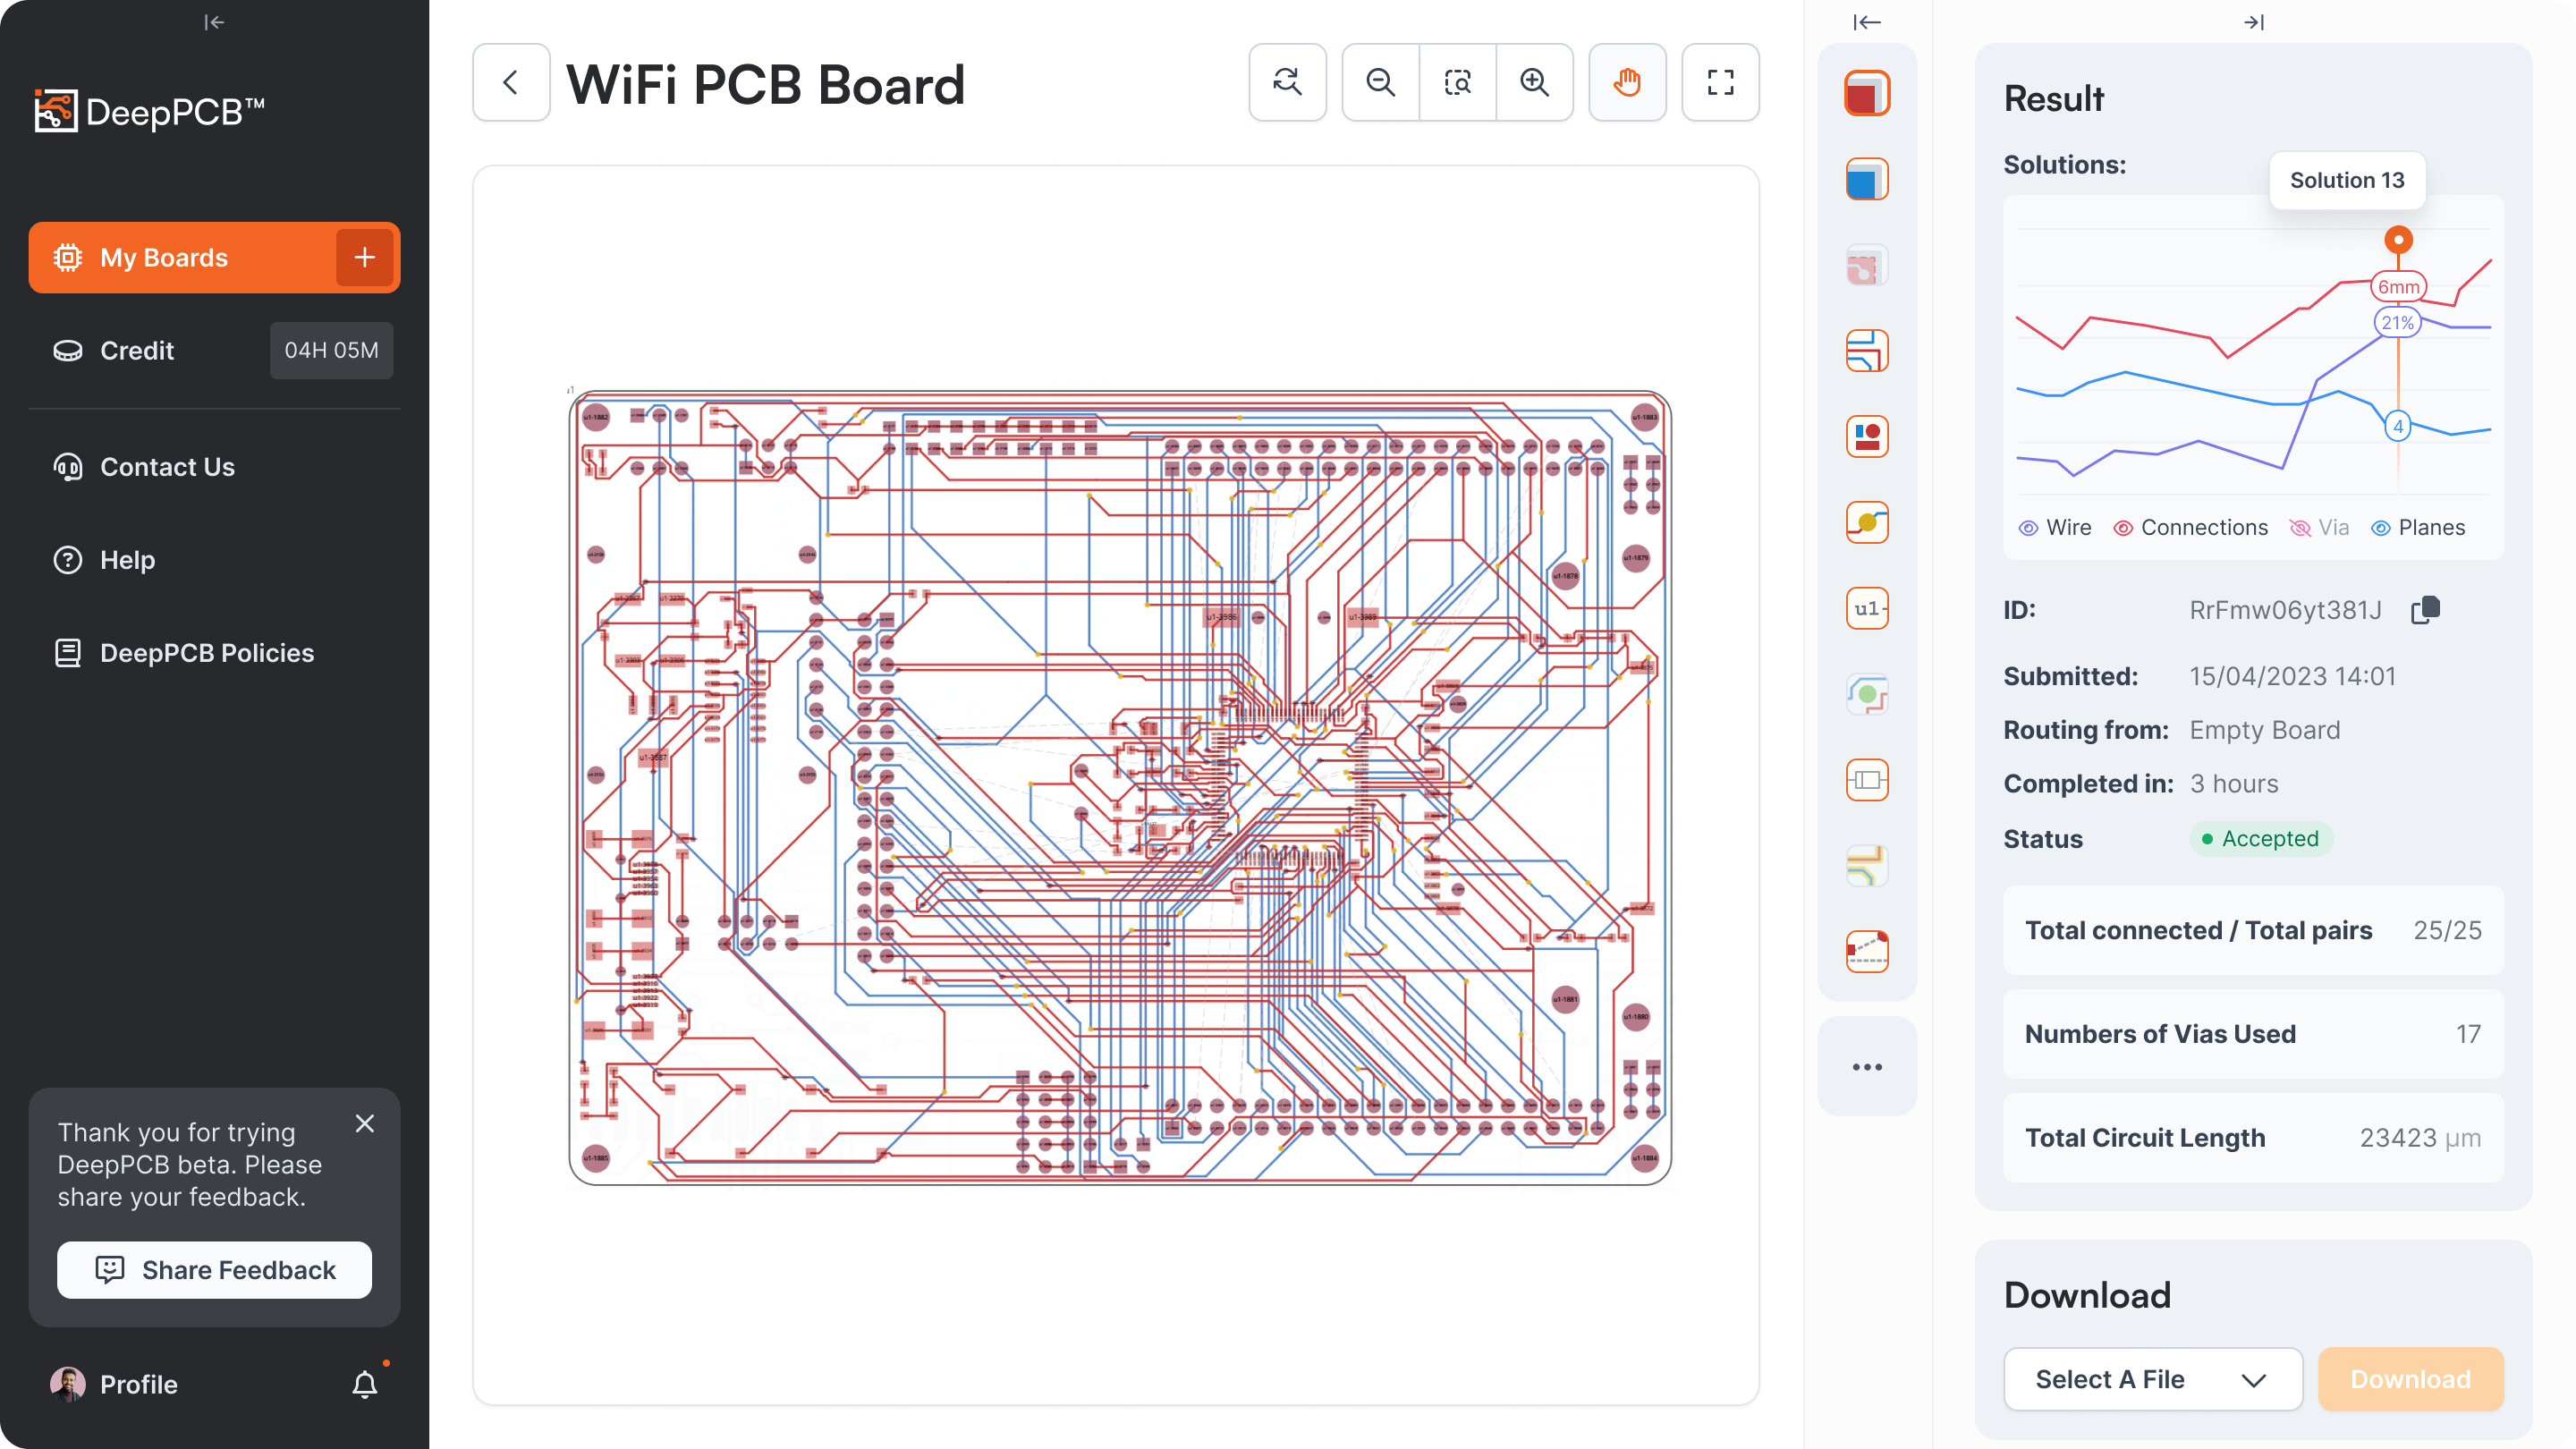 deepPCB platform dashboard that shows a wifi PCB broad with different routes. DeepPCB offers you to apply different layers to the board. In the right side, there is the results of the experiment showing statistics about the execution time, total connected pairs, total circuit lenght and so.